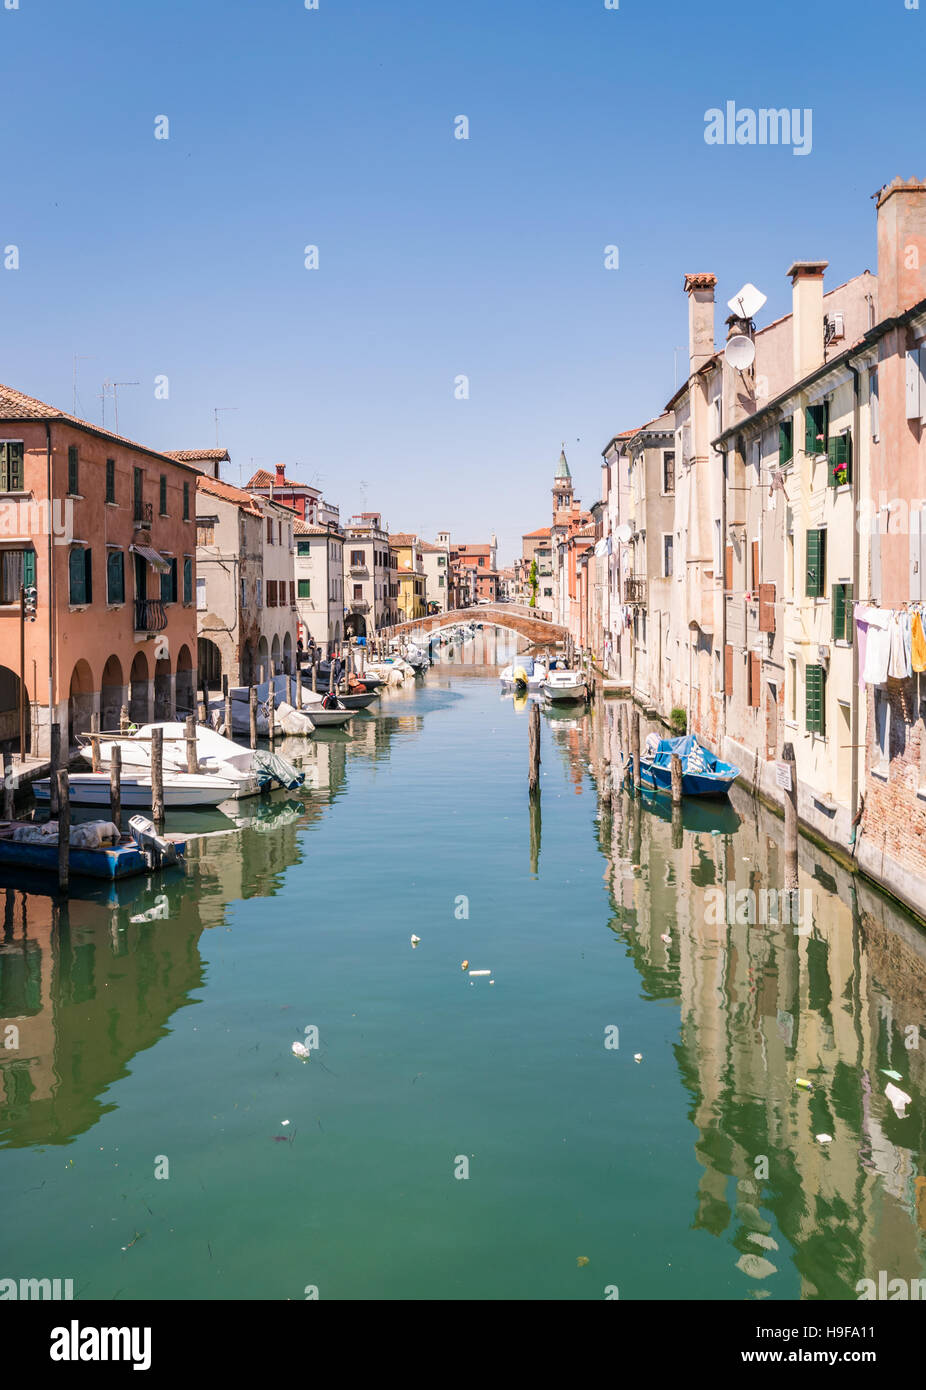 Characteristic canal in Chioggia, lagoon of Venice, Italy. Stock Photo